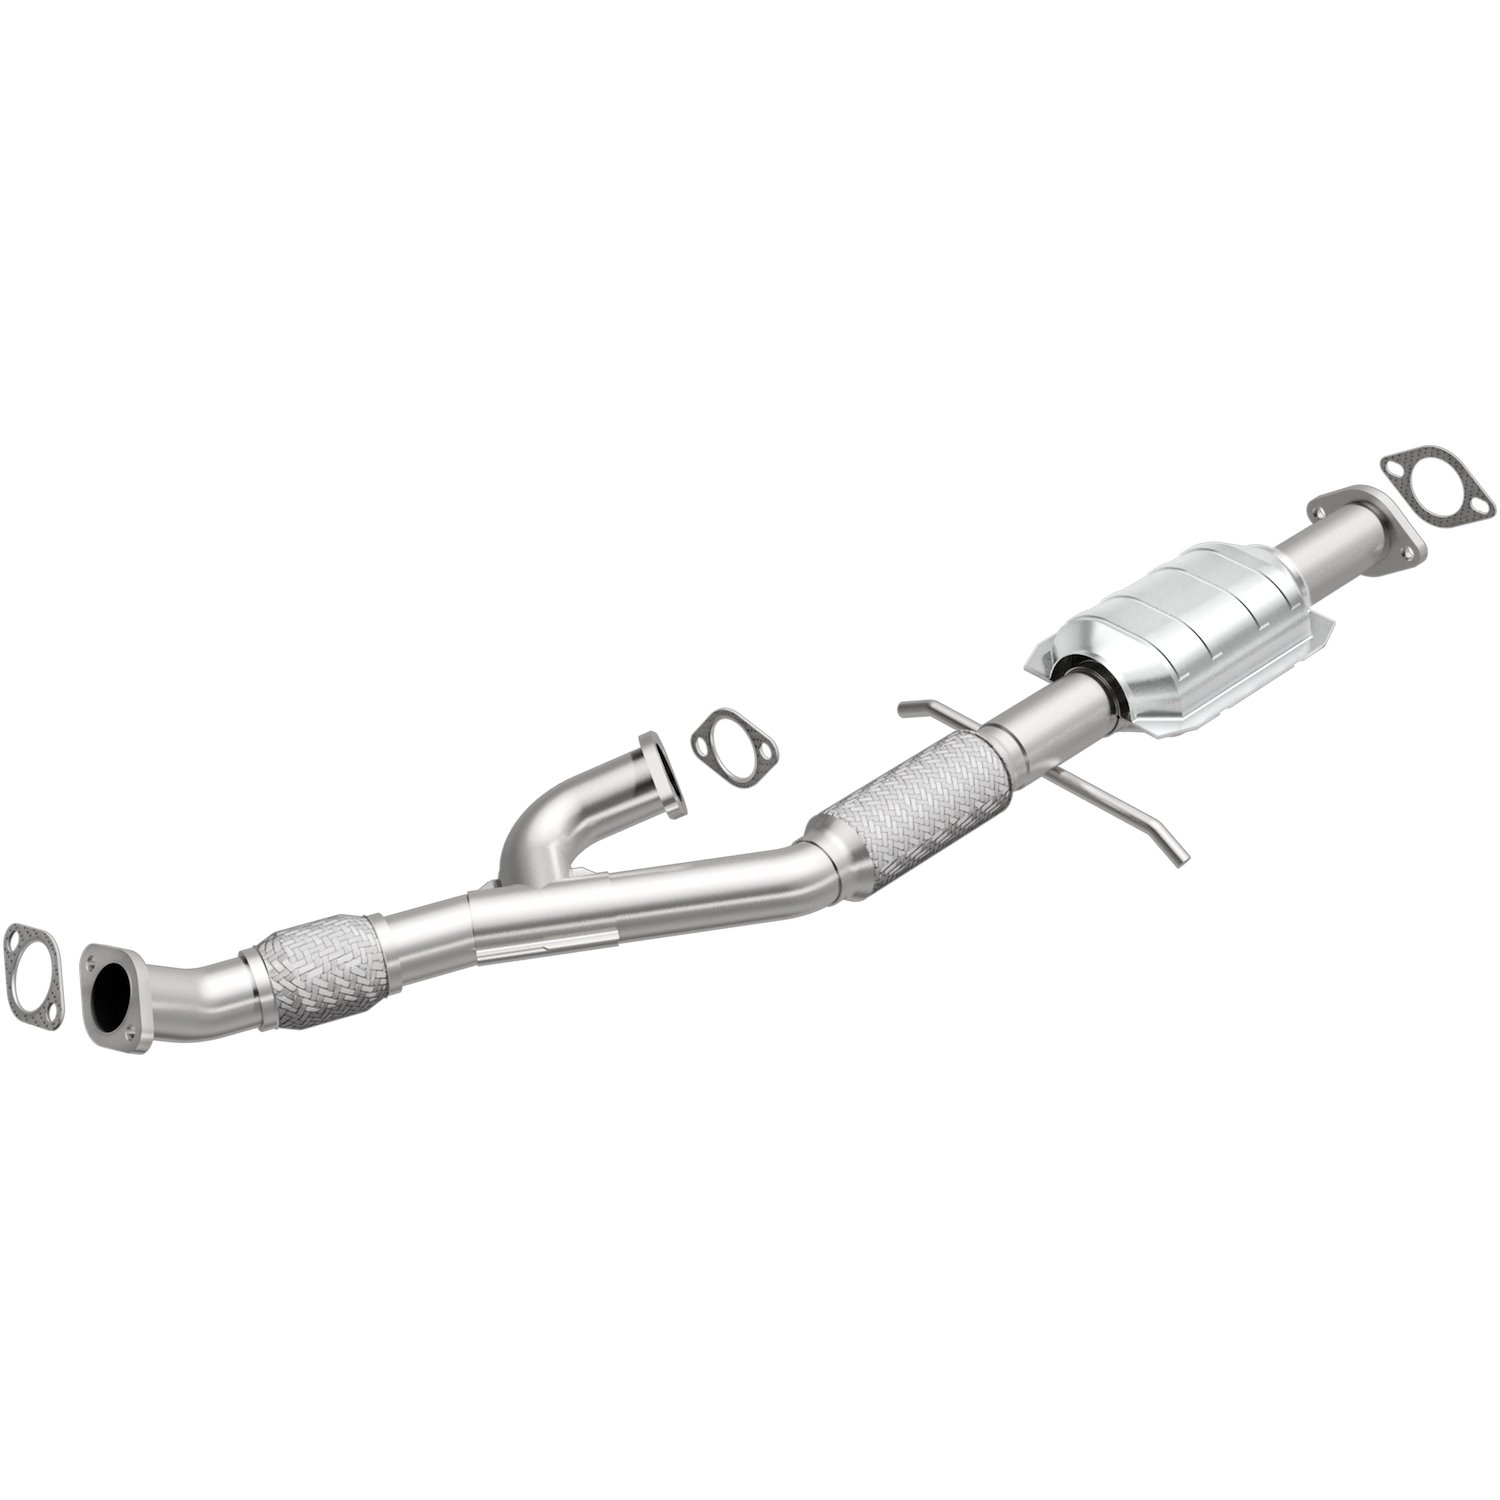 OEM Grade Federal / EPA Compliant Direct-Fit Catalytic Converter 49906